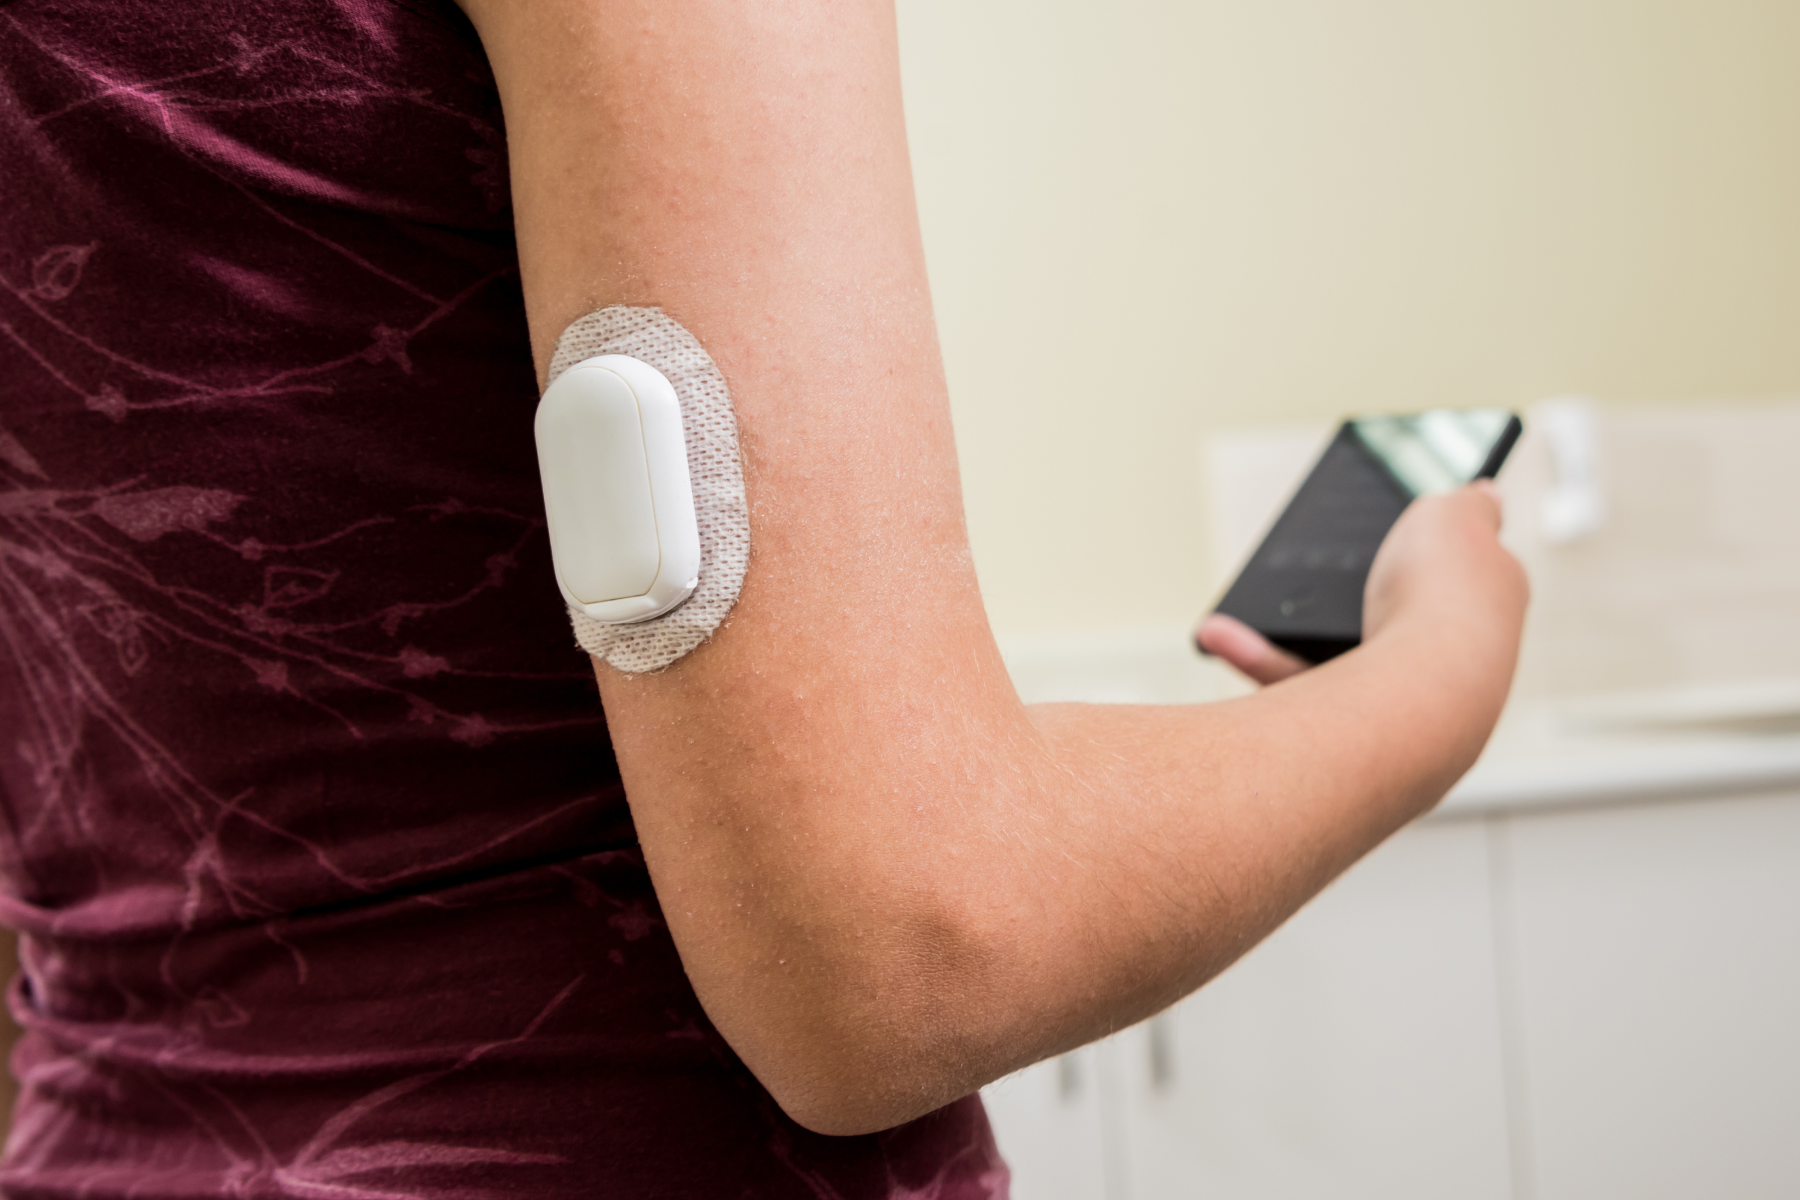 photograph of a blood glucose monitor on arm and phone in hand